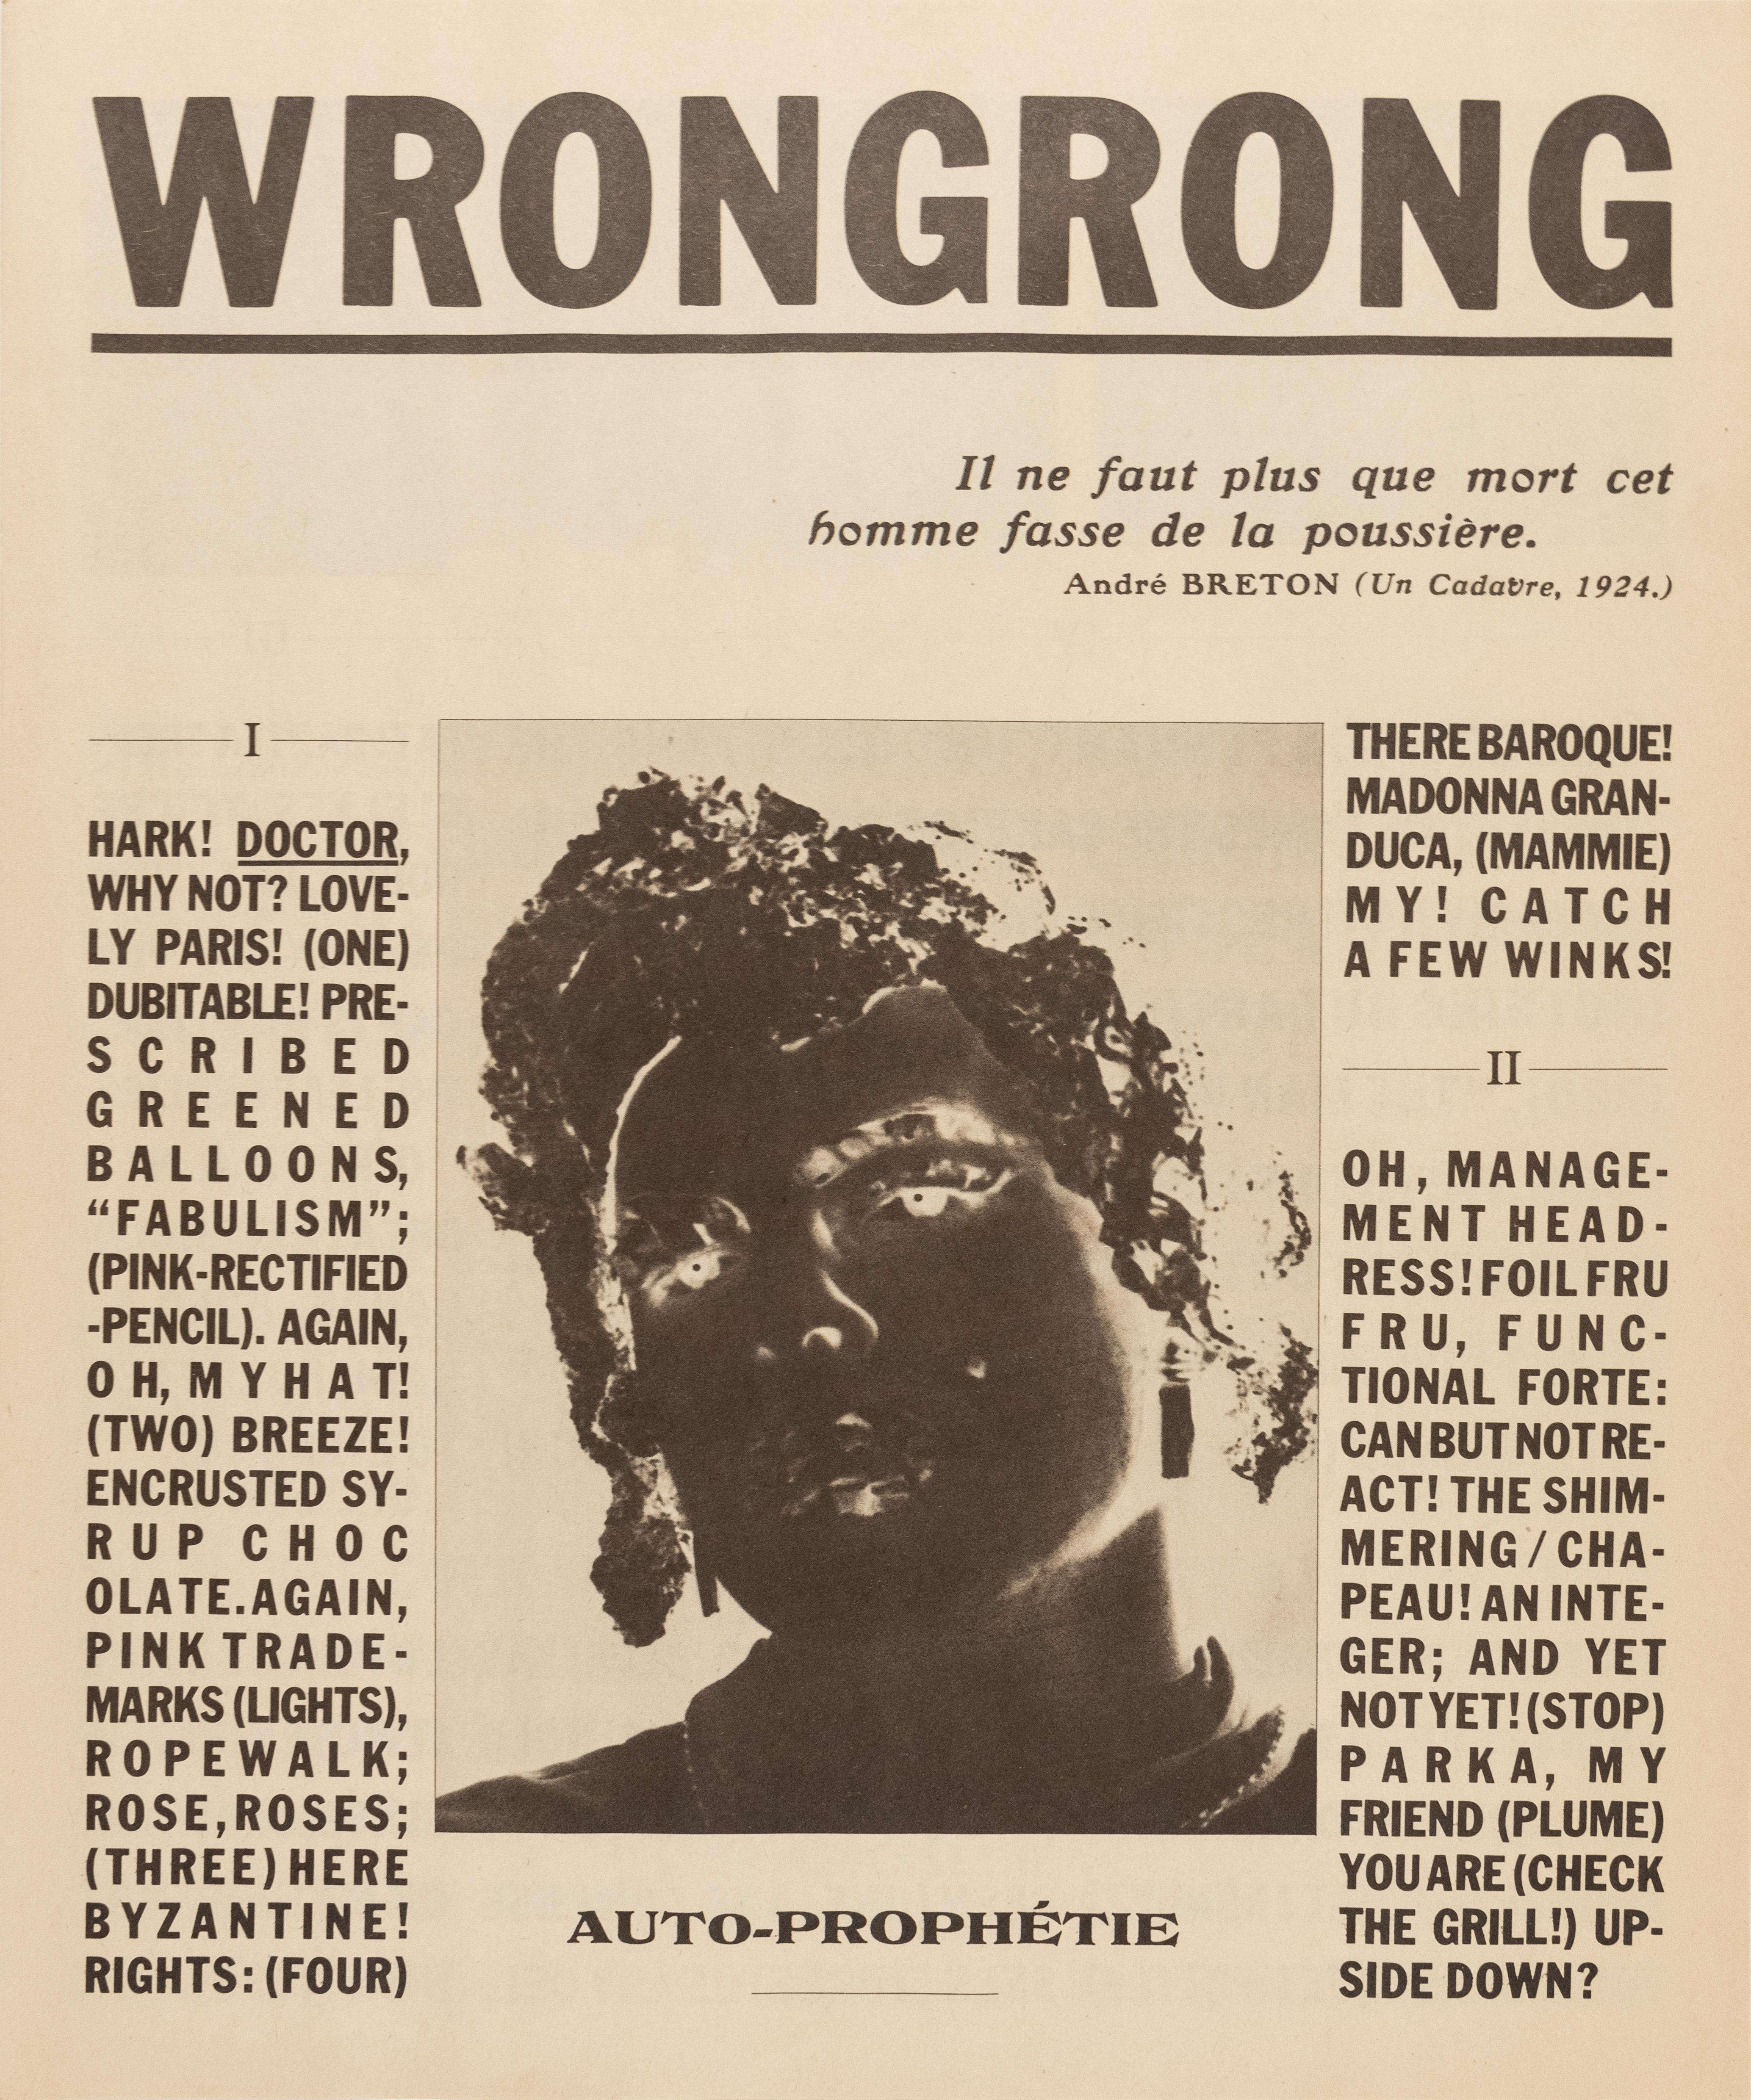 “Wrongrong” publication [Based on “Un Cadaver” by André Breton, 1924] - Photograph by Jimmy DeSana